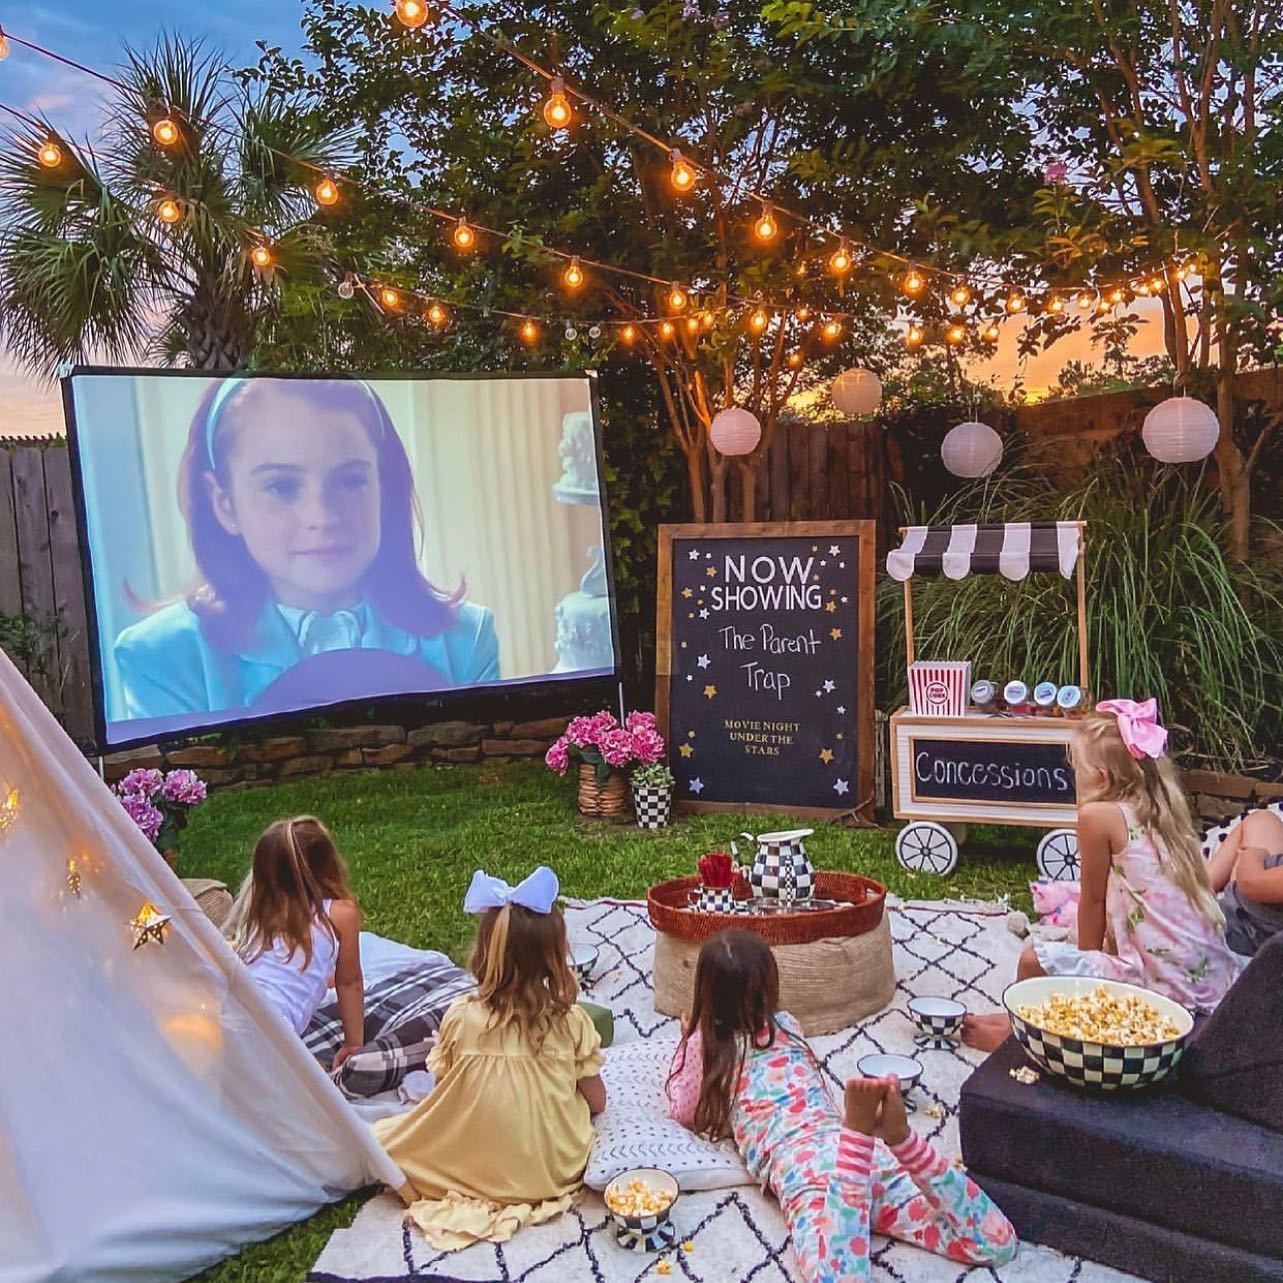 outdoor movie theater with projector screen. Photo by Instagram user @glampingalabama